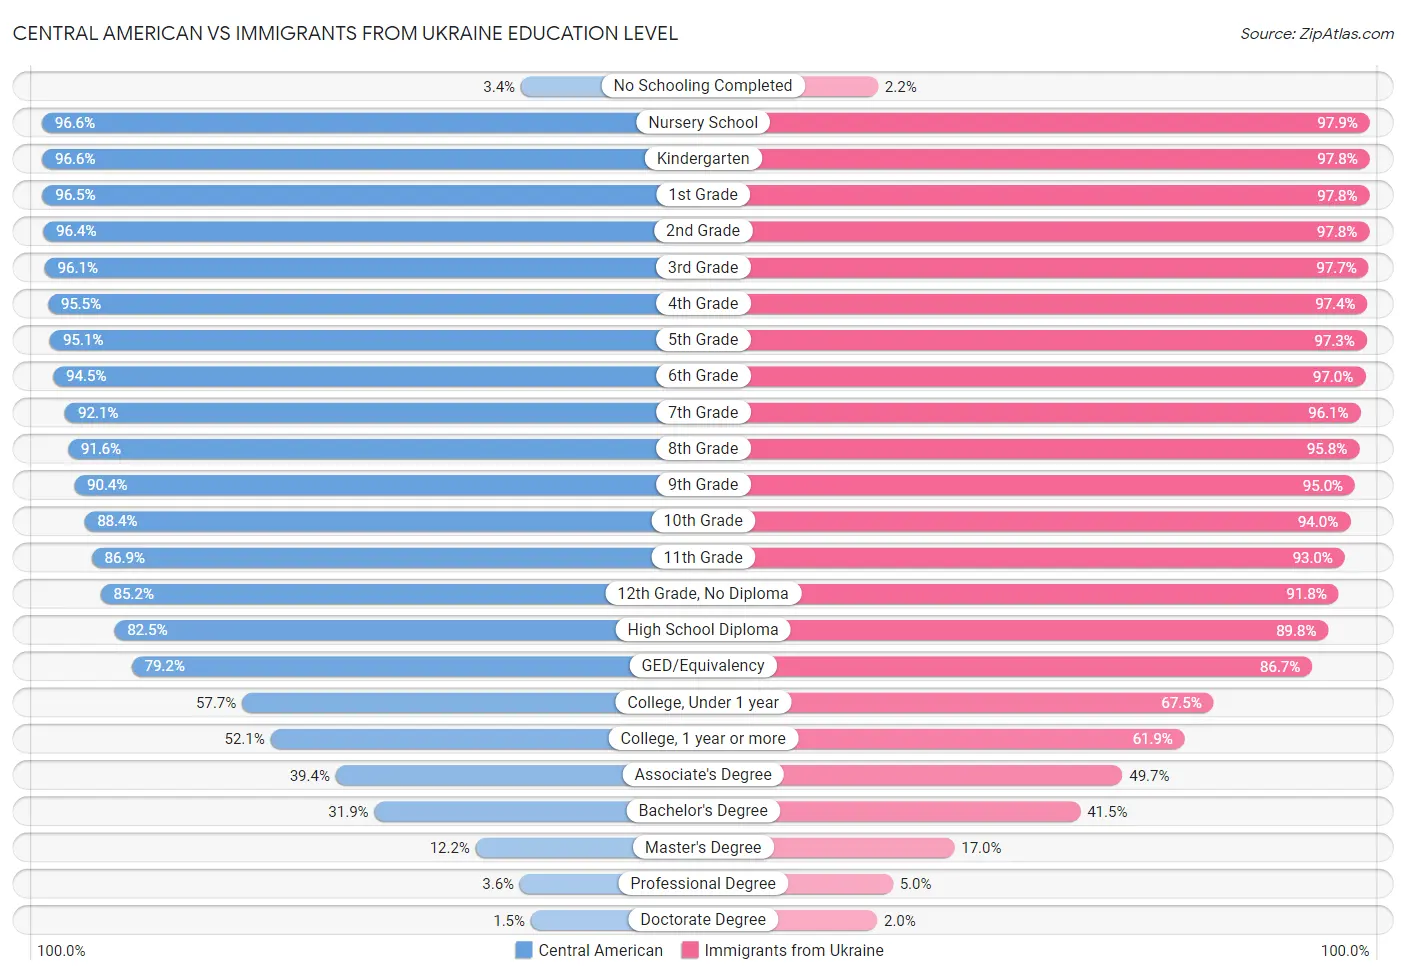 Central American vs Immigrants from Ukraine Education Level